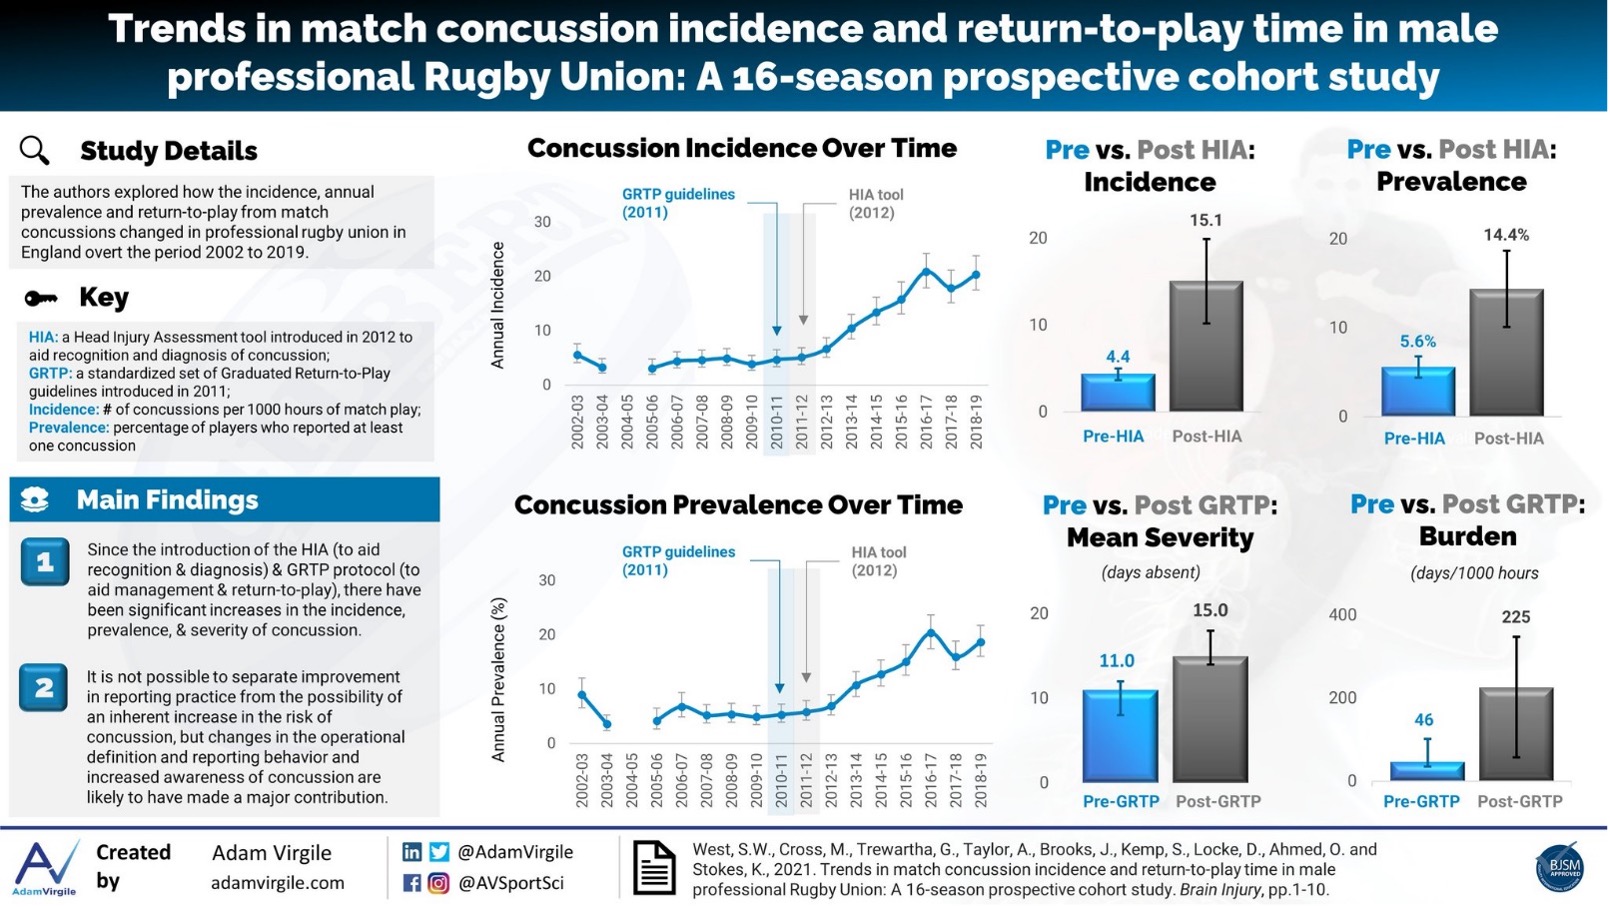 Concussion in professional men’s rugby union: Improvement in detection or increased risk?  